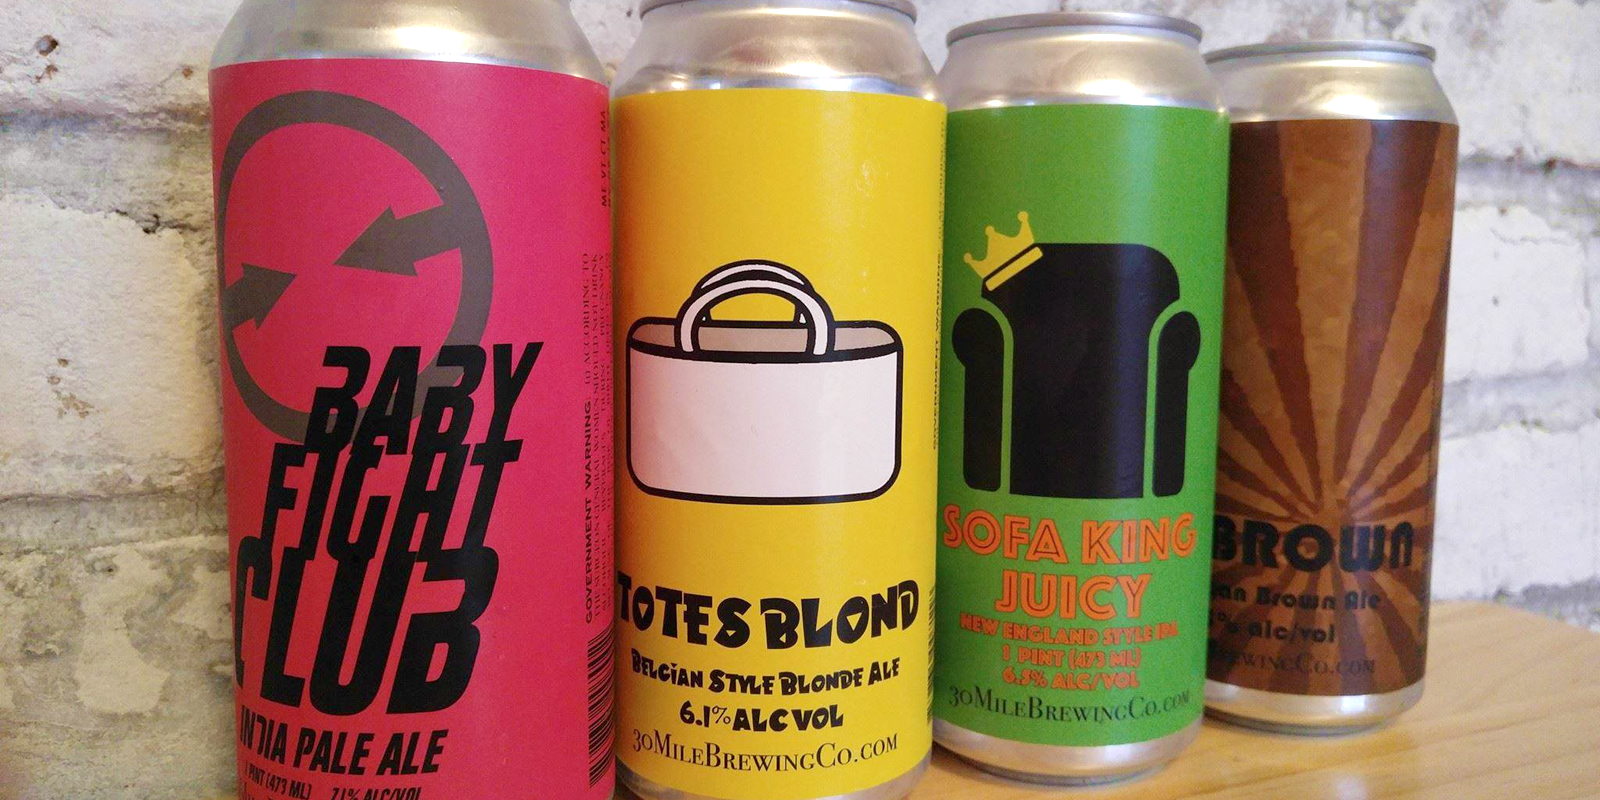 30 Mile Brewing Company Cans